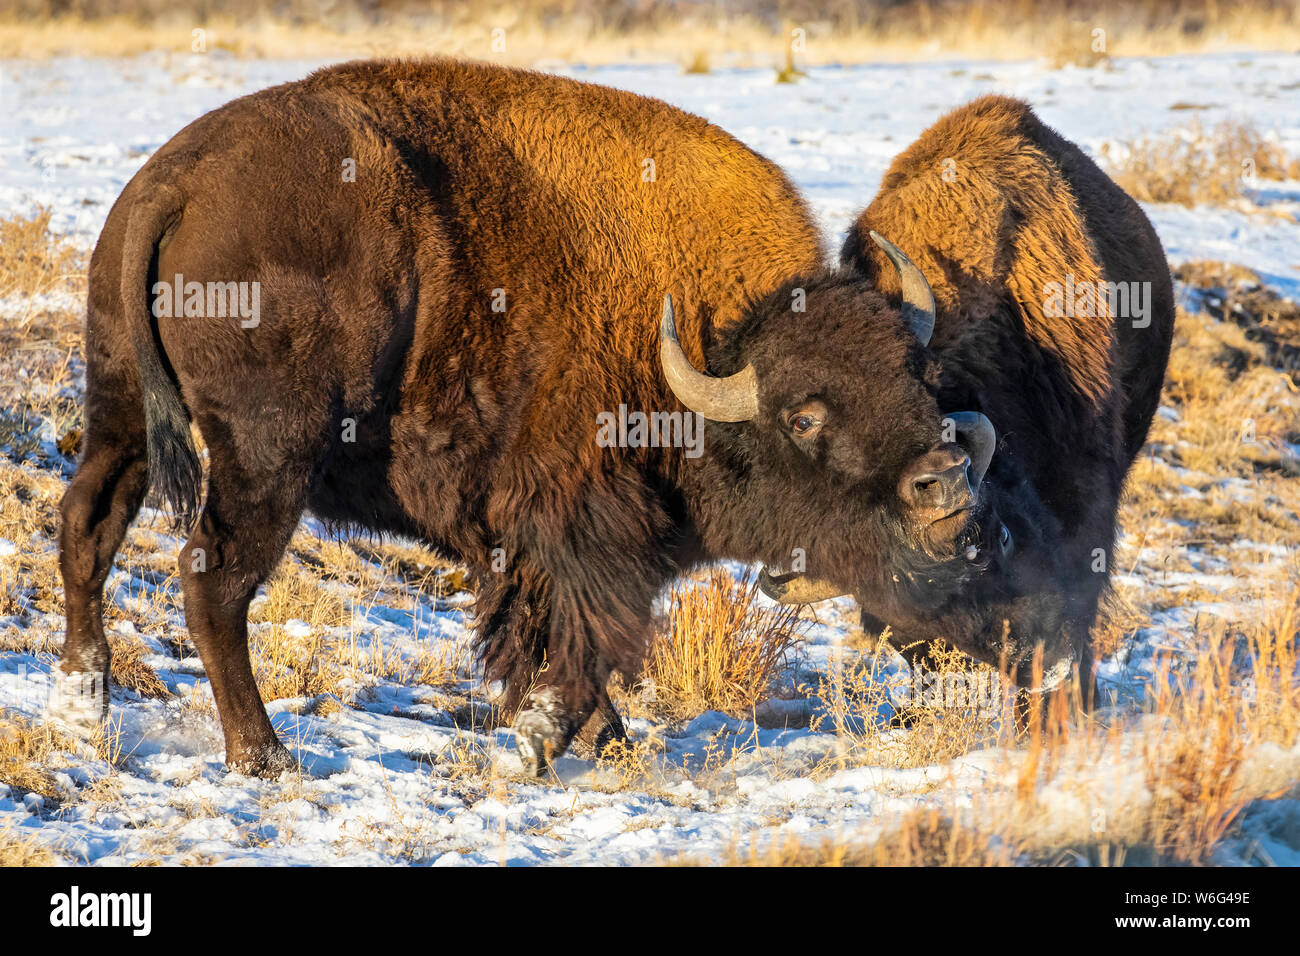 Bison (Bison bison) in a snow-covered field; Denver, Colorado, United States of America Stock Photo